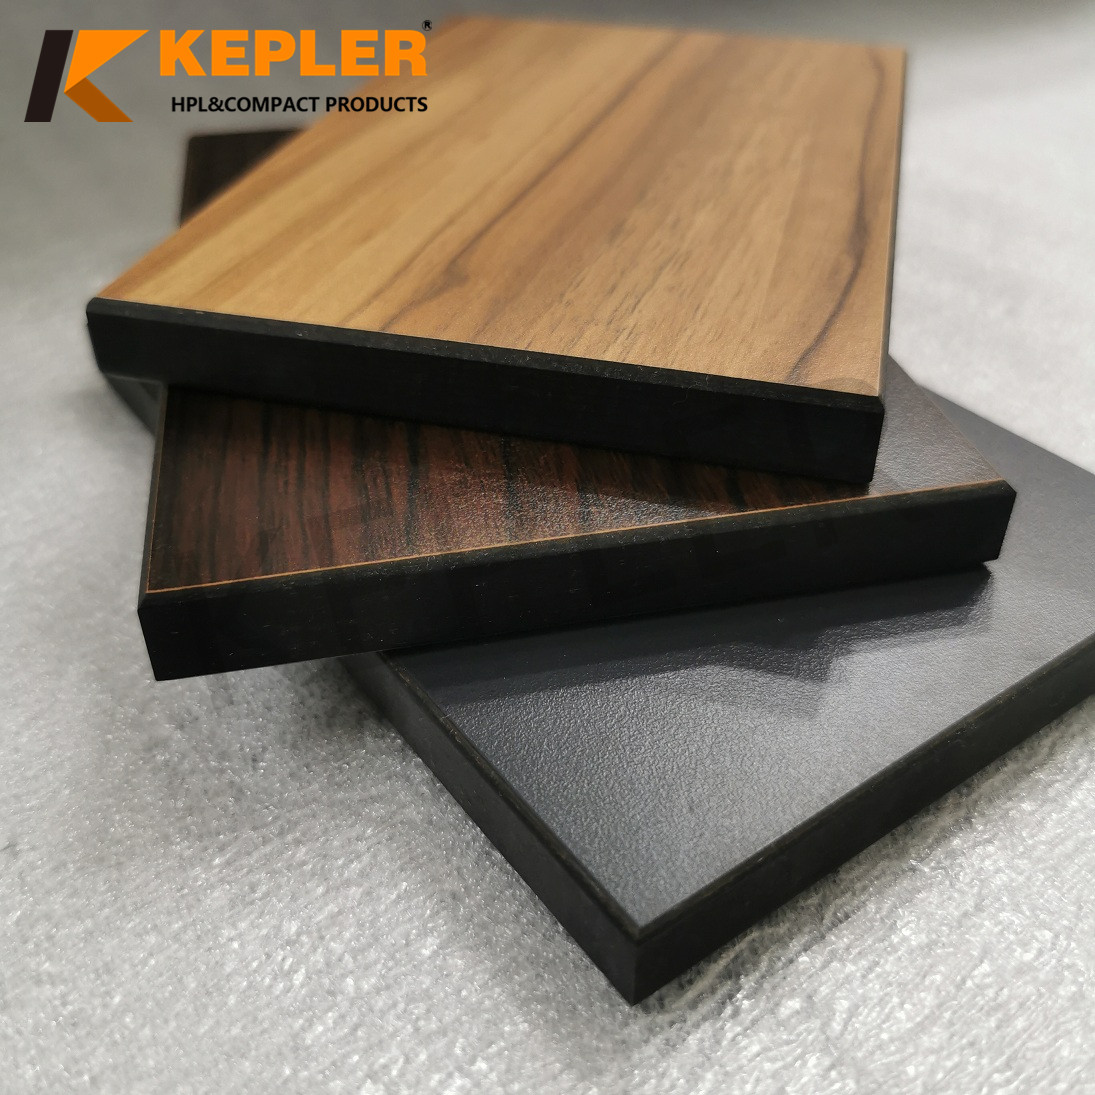 Kepler HPL Compact Laminate Board for Table Top